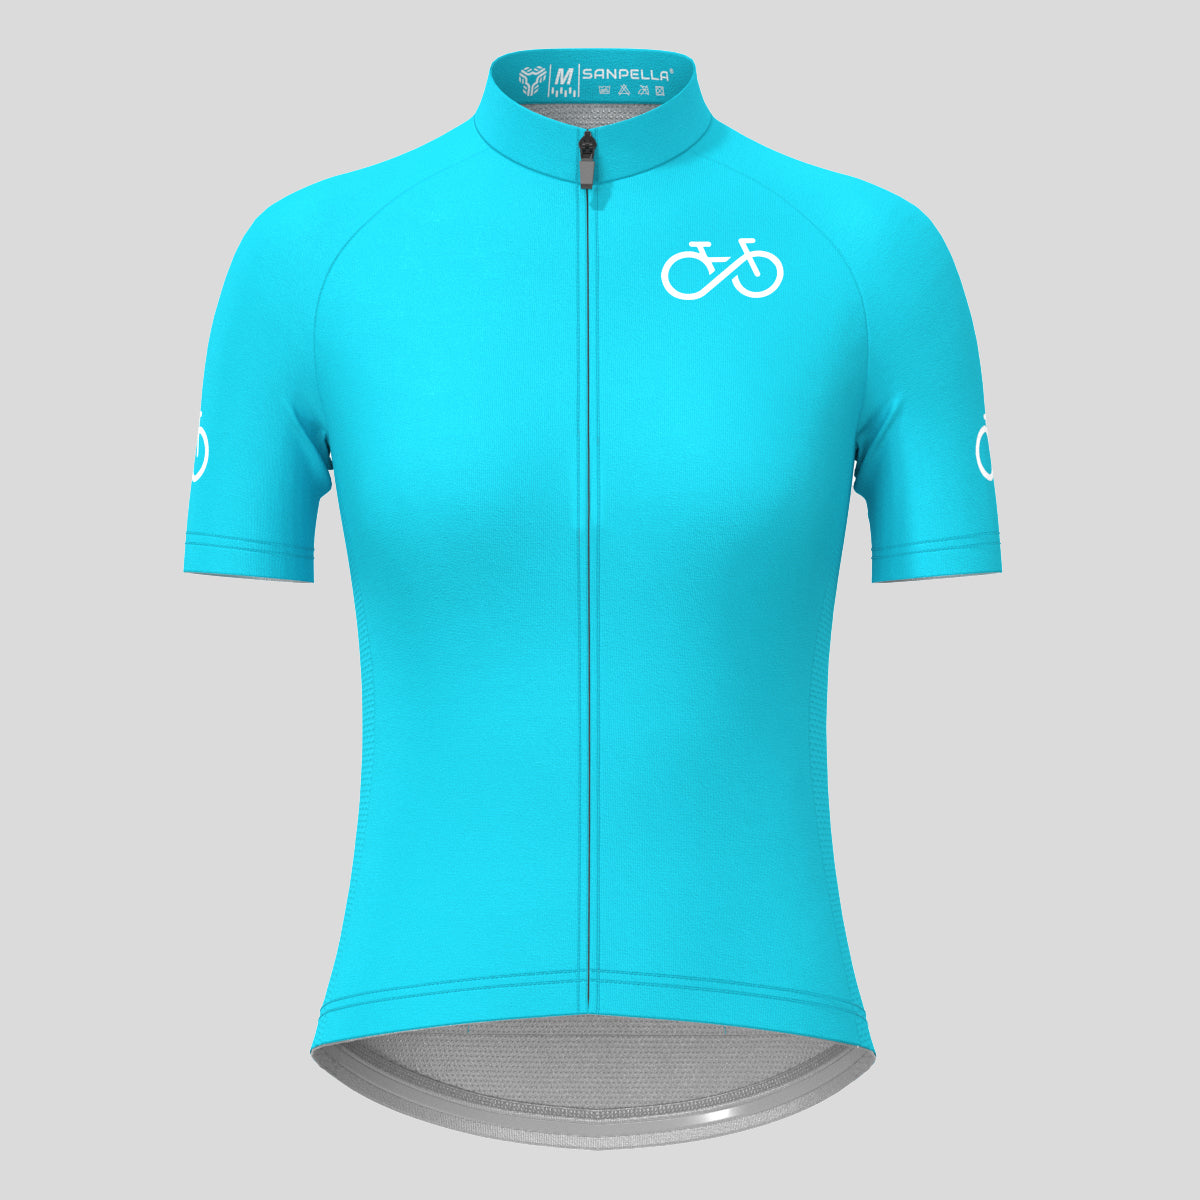 Ride Forever Women's Cycling Jersey - Ocean